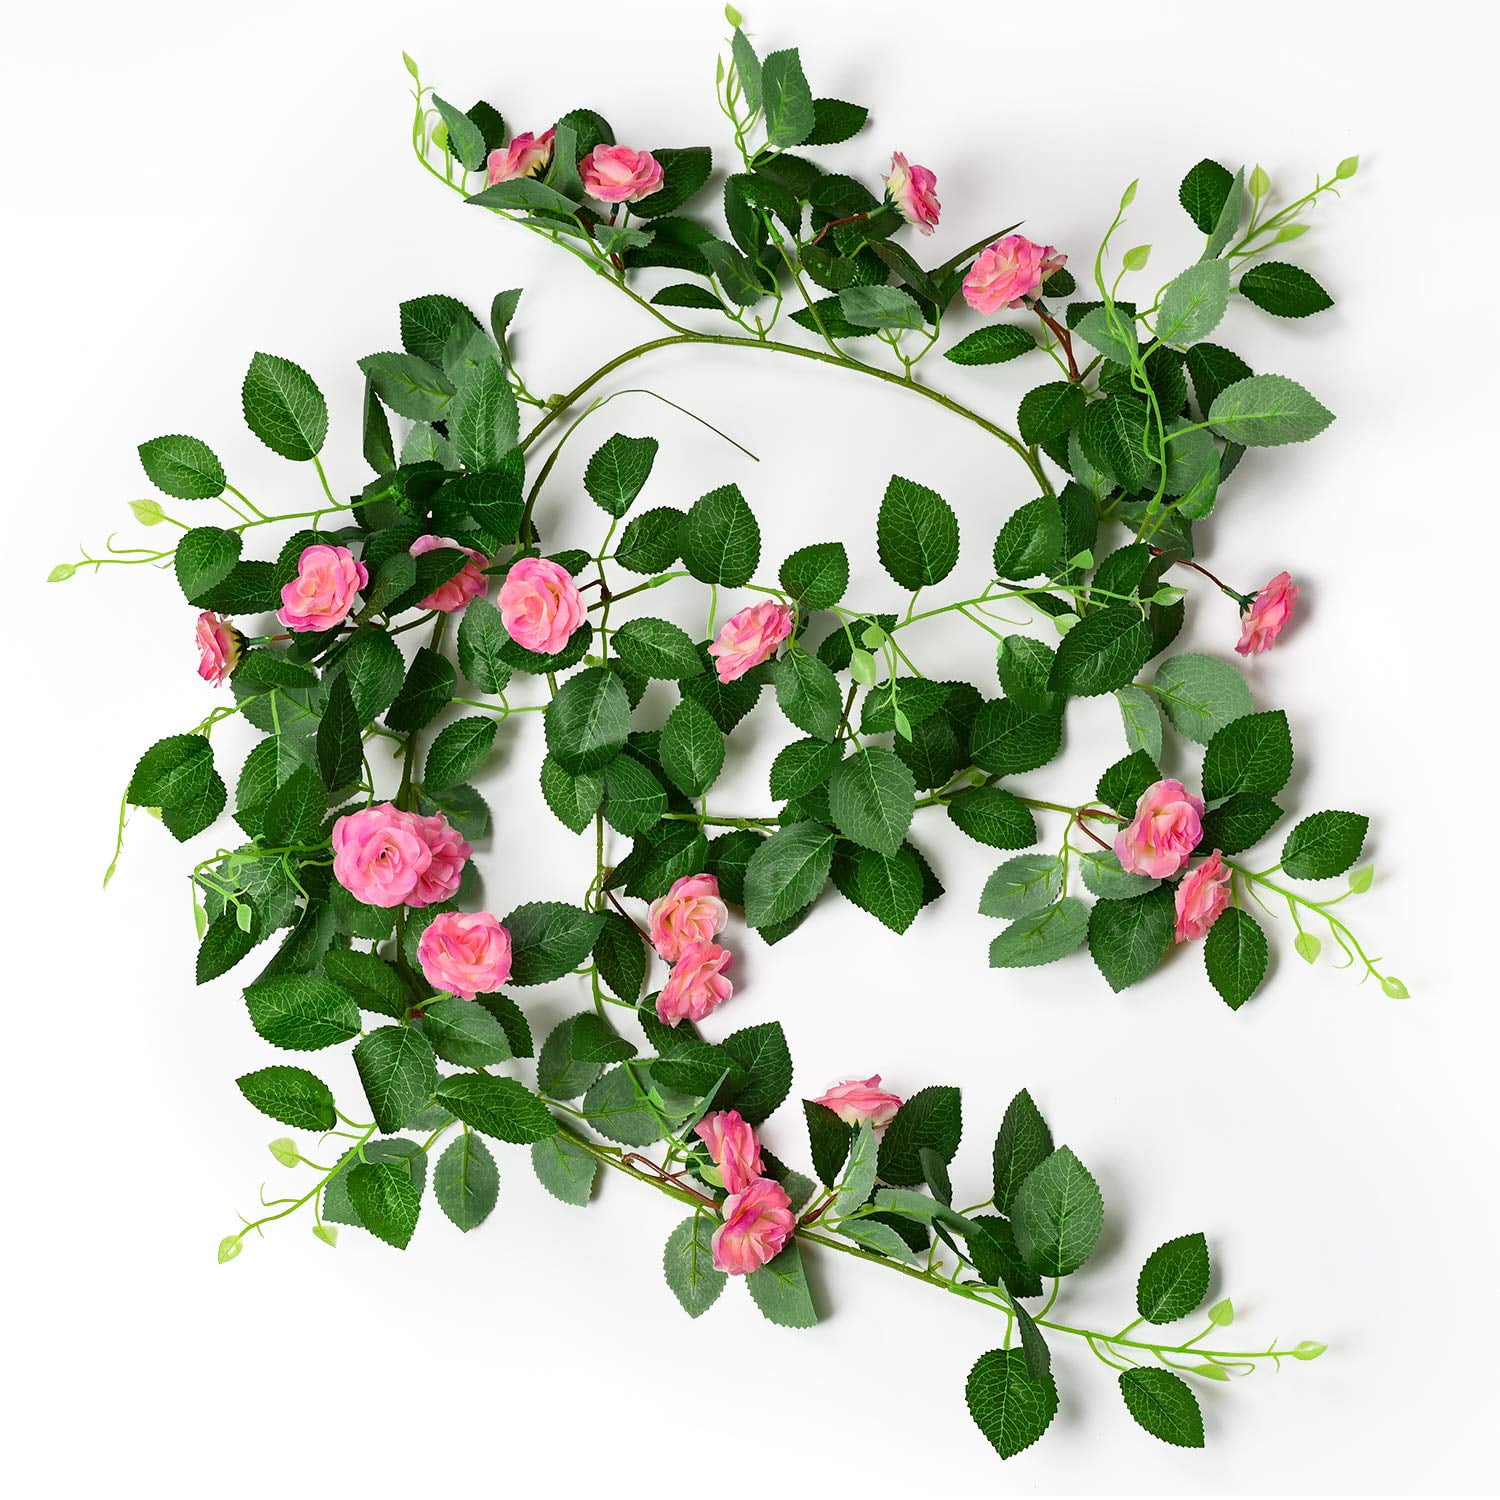 Yinmgmhj Artificial & Flowers Flower Garland Rose Vine Artificial Flowers Hanging Rose Ivy Hanging Basket Silicone Mold, Size: 10 in